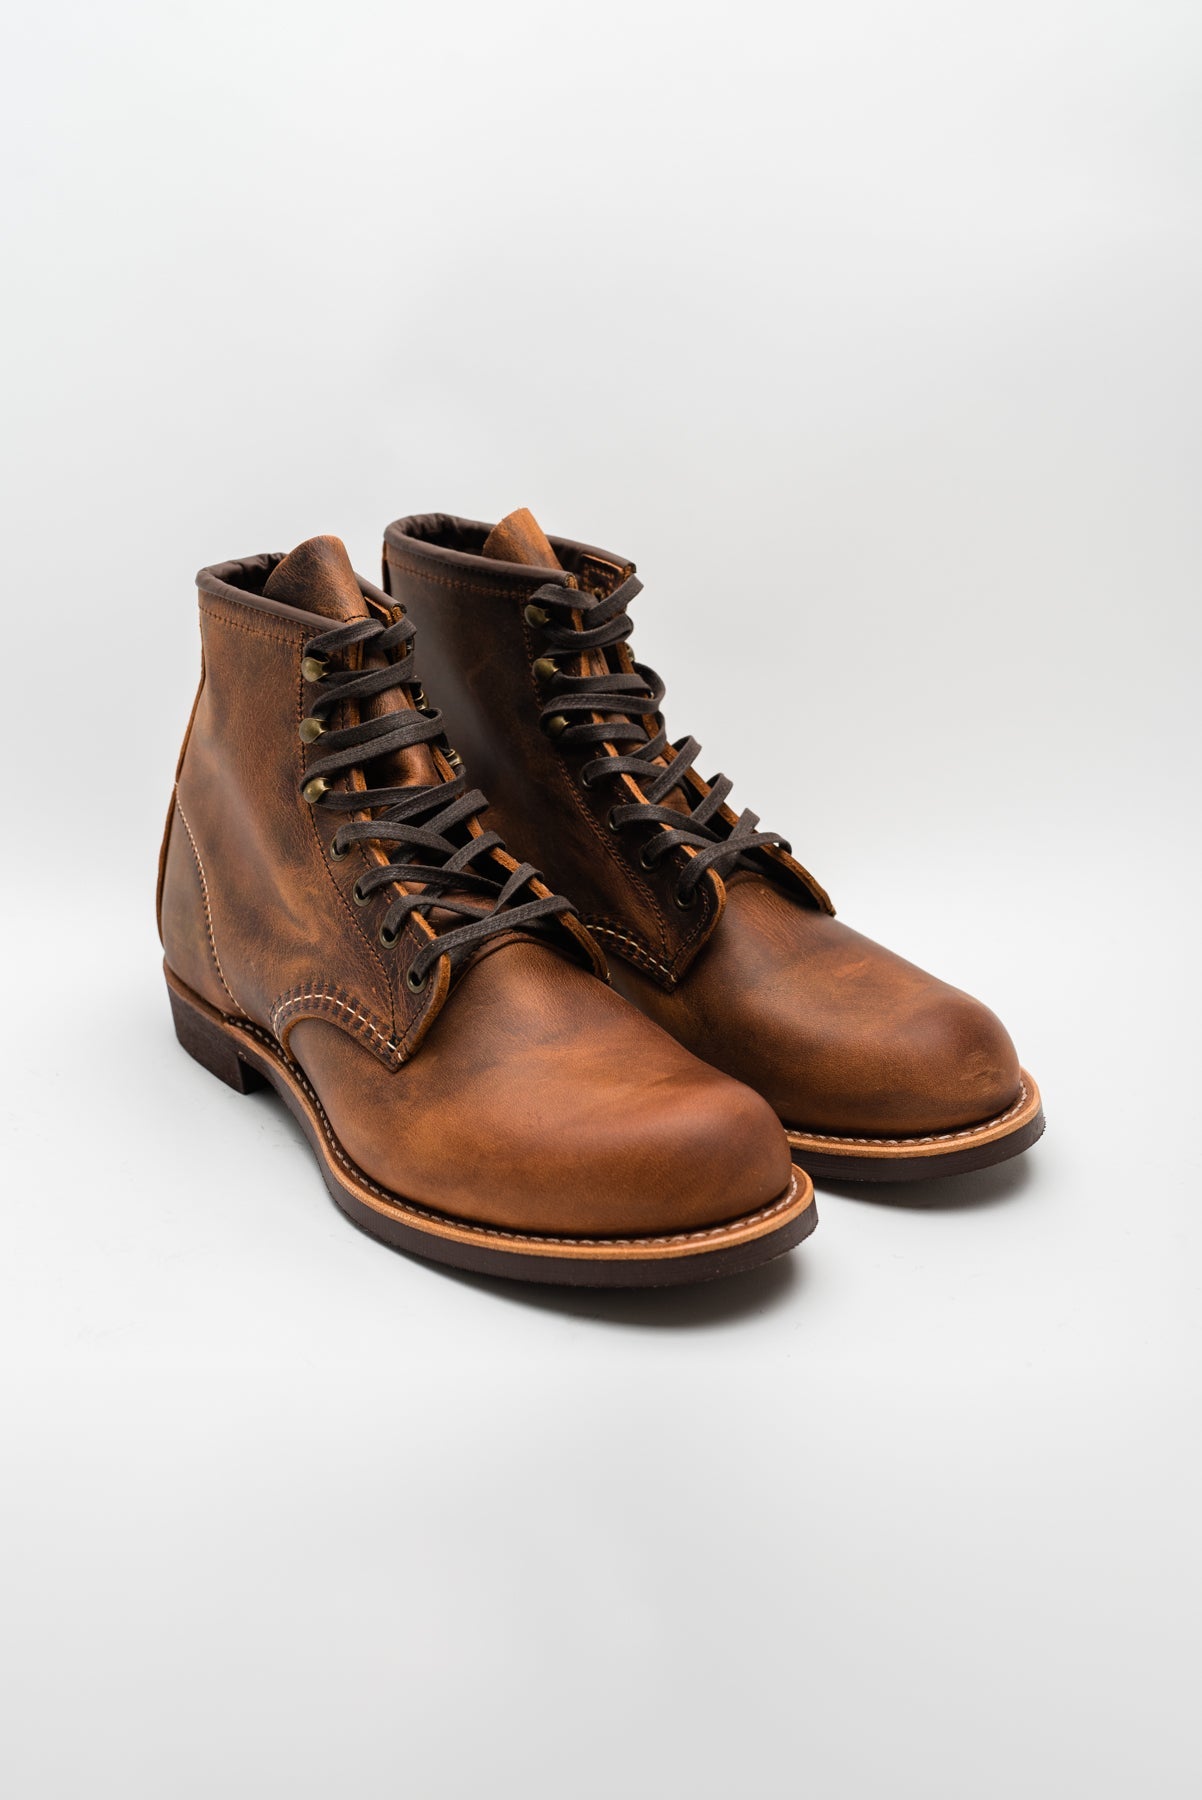 Red Wing Heritage Blacksmith #3343 - Copper Rough & Tough